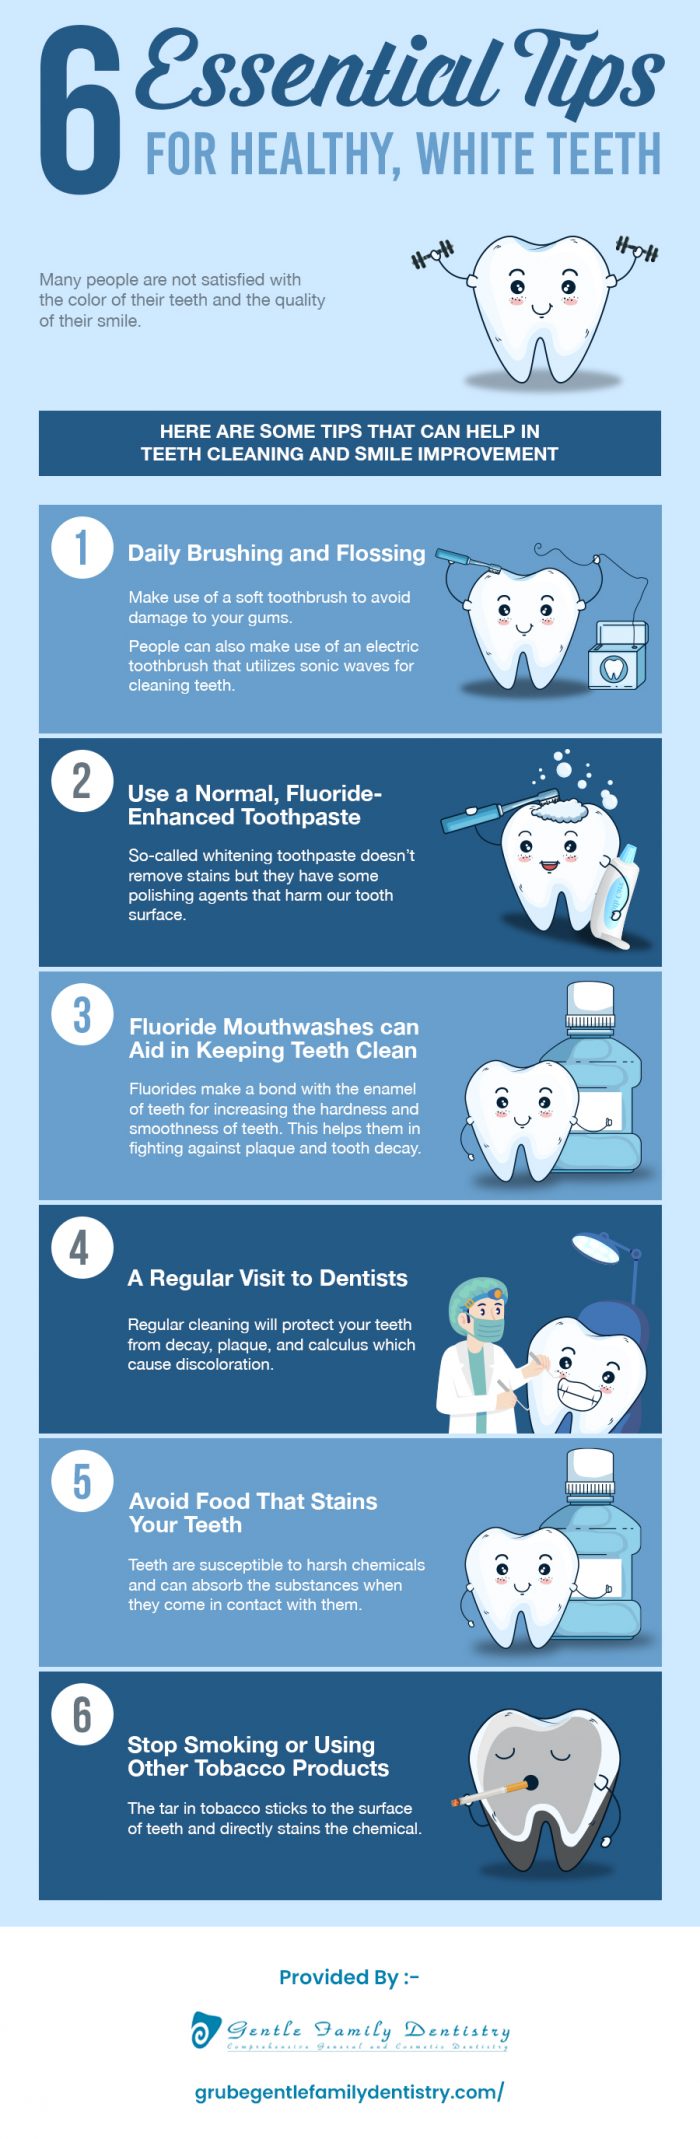 Enhance your Smile With Teeth Whitening in Chesapeake, VA from Grube Gentle Family Dentistry